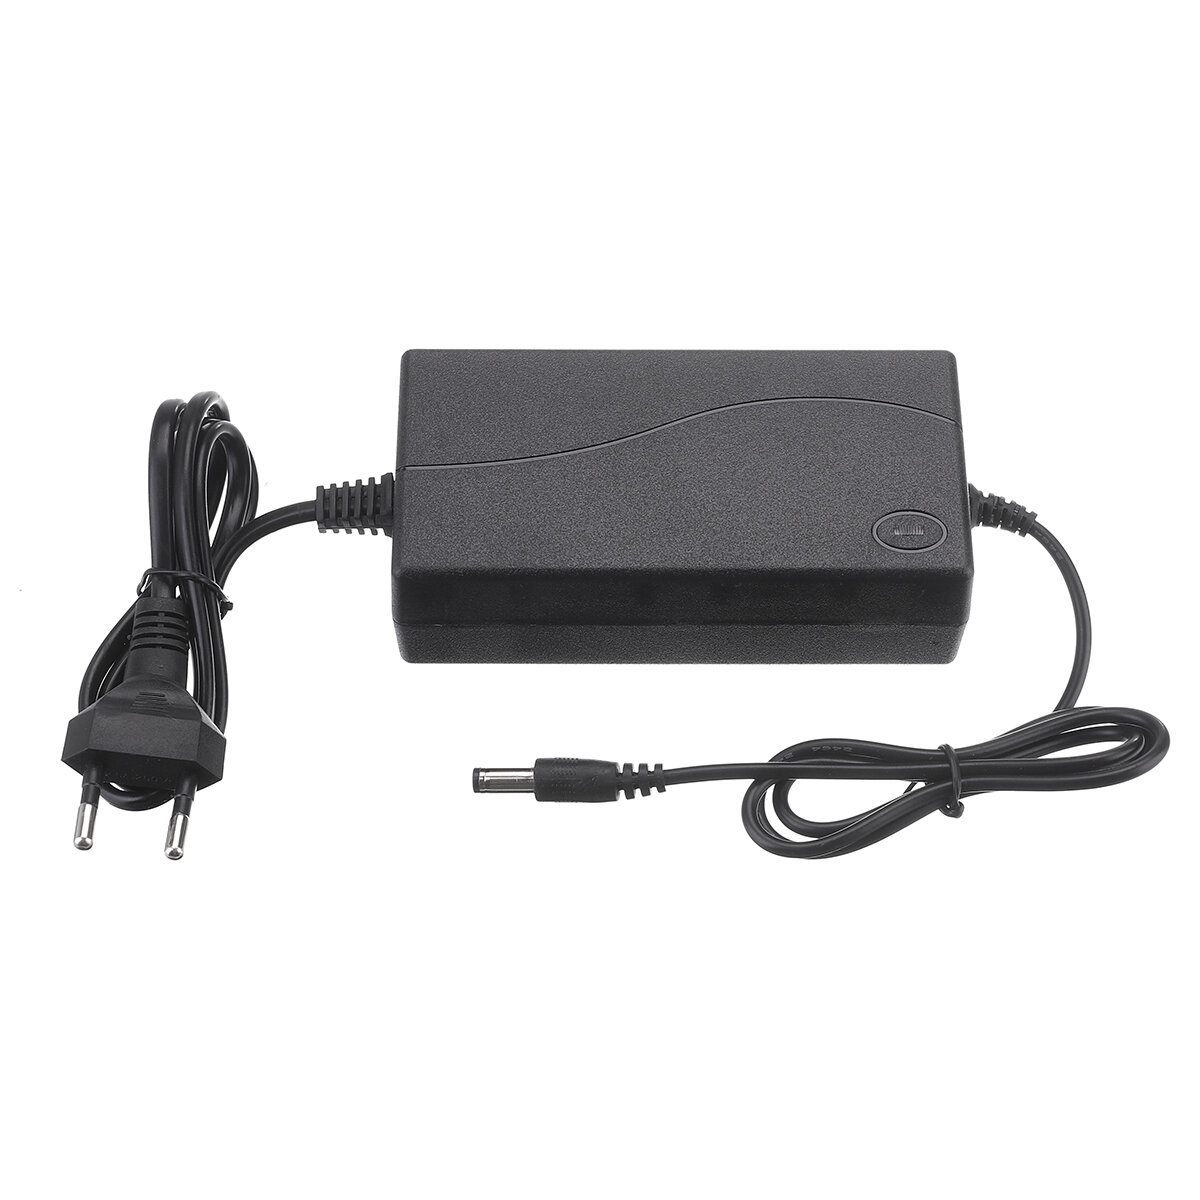 18V- 21V Lithium Battery Charger Supply DC 80-240V Switching Power Wall Charger For Makita Battery